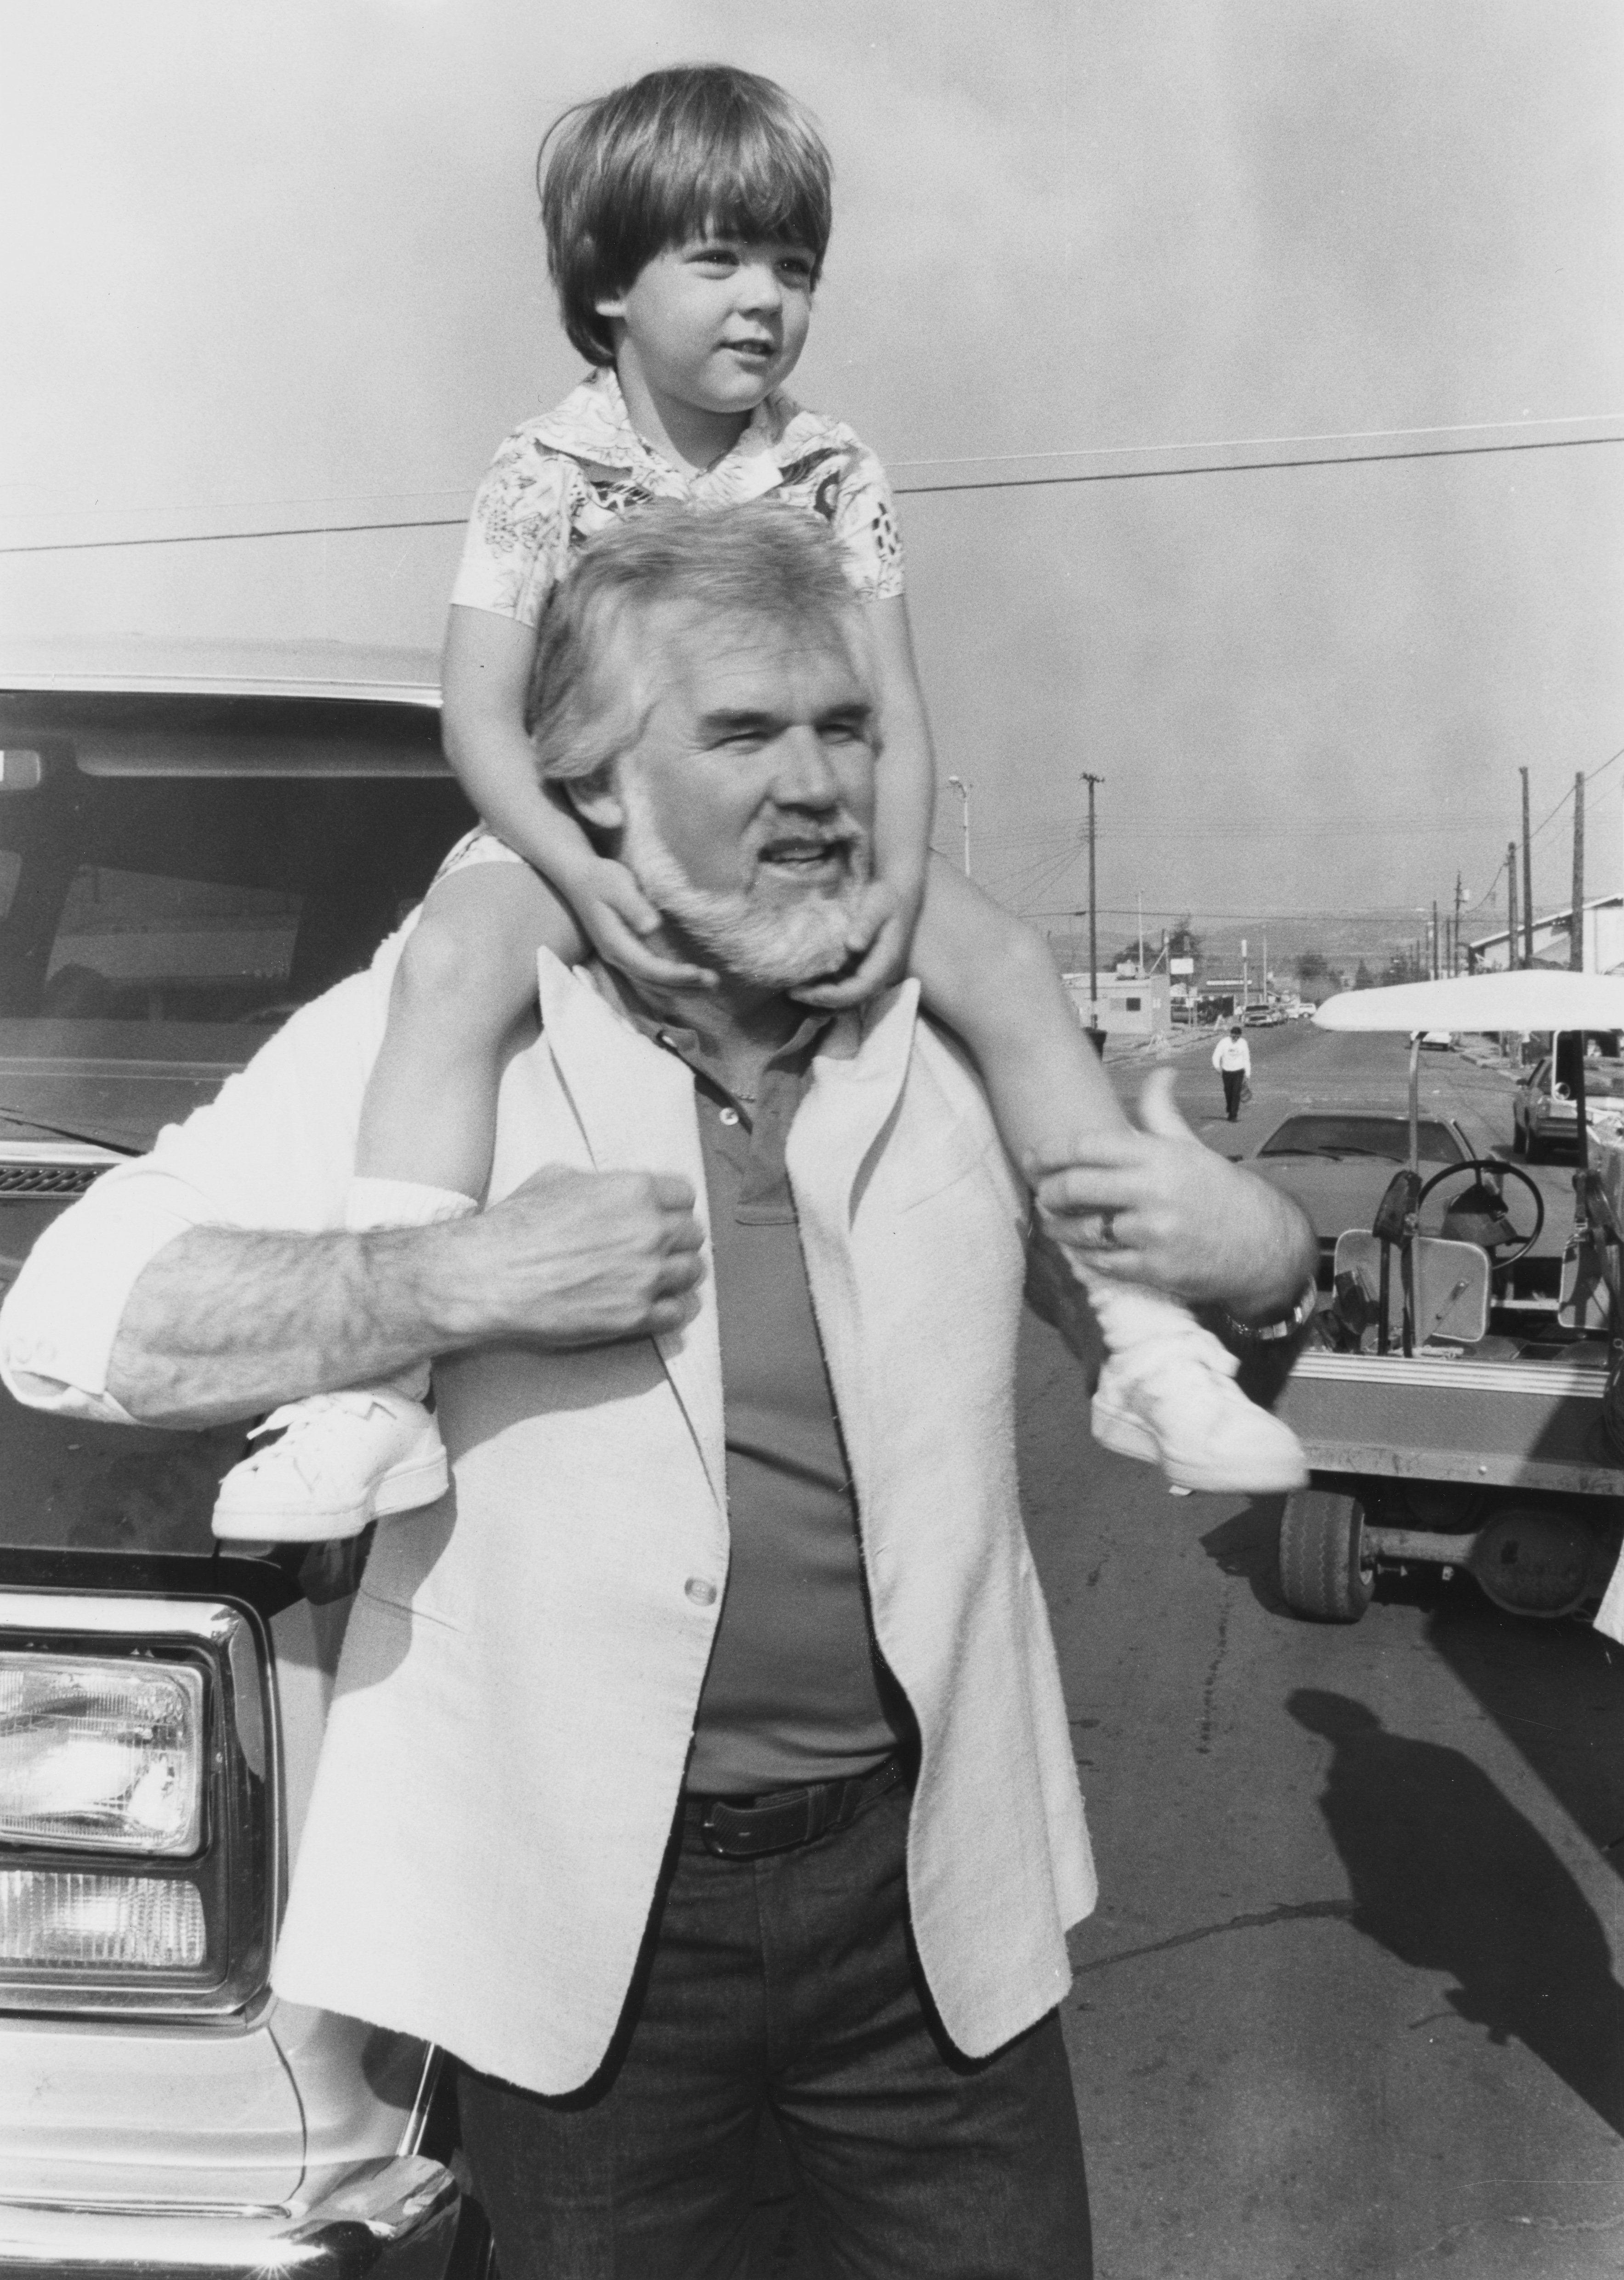 American singer-songwriter and musician Kenny Rogers (1938-2020) and his son, Christopher Rogers, who sits on his father's shoulders, attend the taping of the video and commerical for the 'Hands Across America' campaign benefit, at Center Street in Taft, California, 18th January 1986. | Source: Getty Images